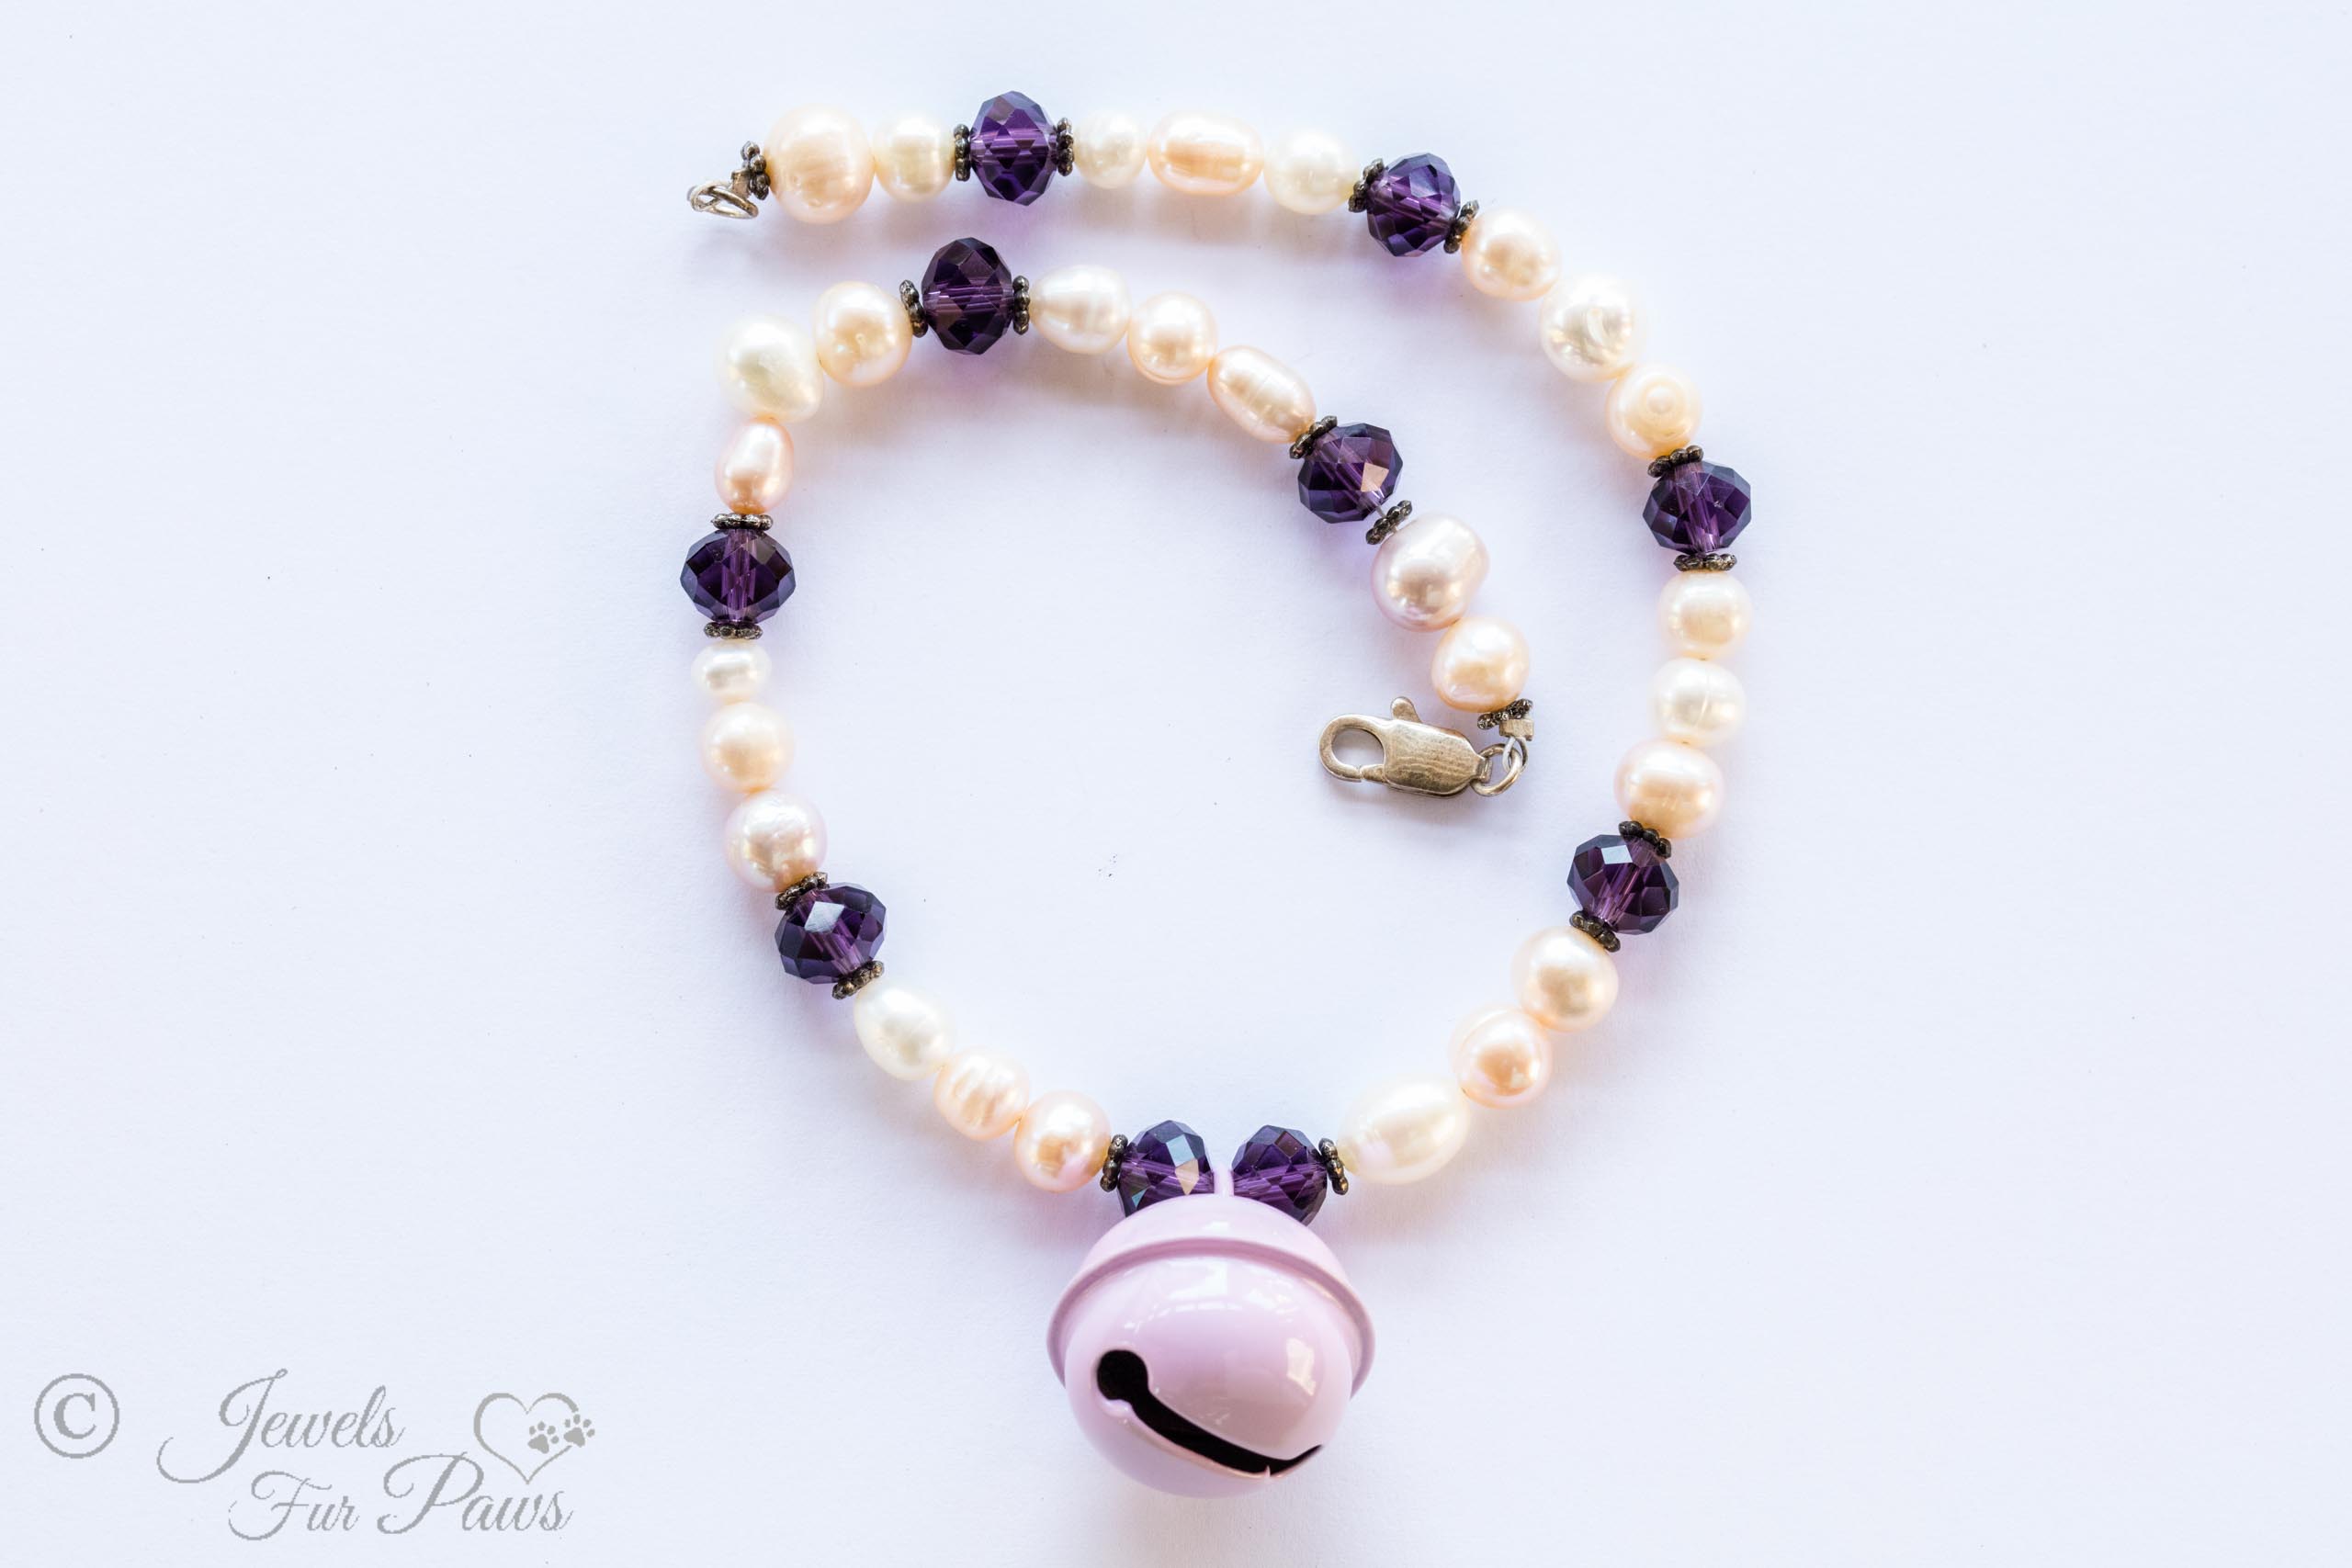 cultured pearls with amethyst beads and a lavender hanging bell on a white background